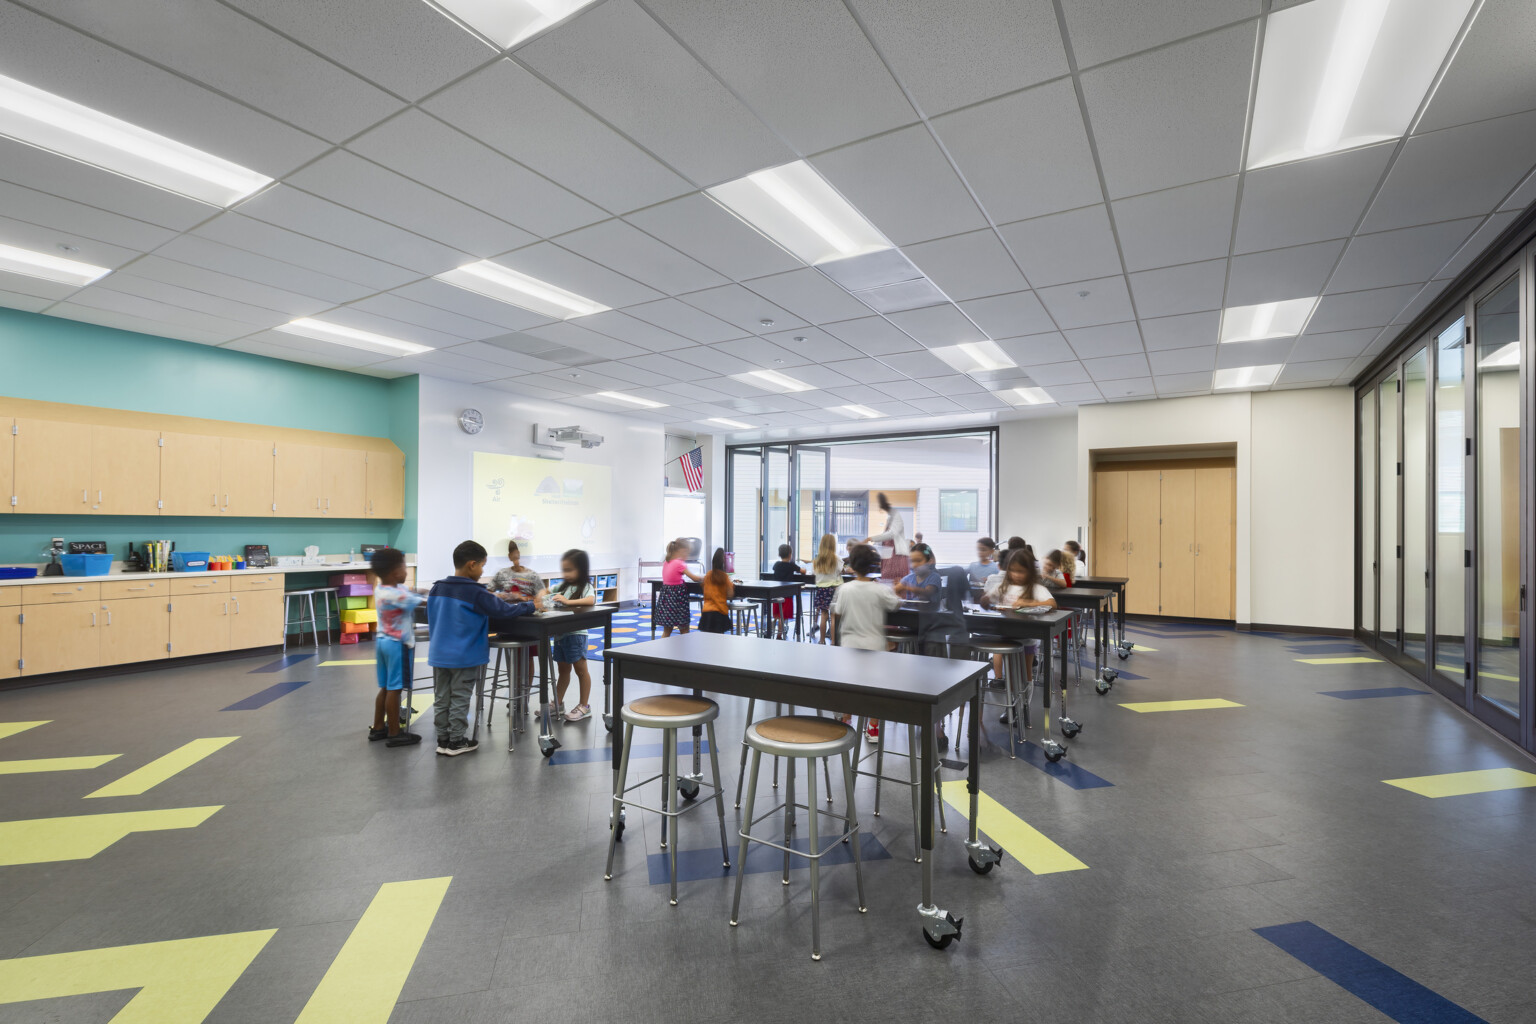 Elementary school classroom with bright color accents and flexible glass walls students works at tables and stools